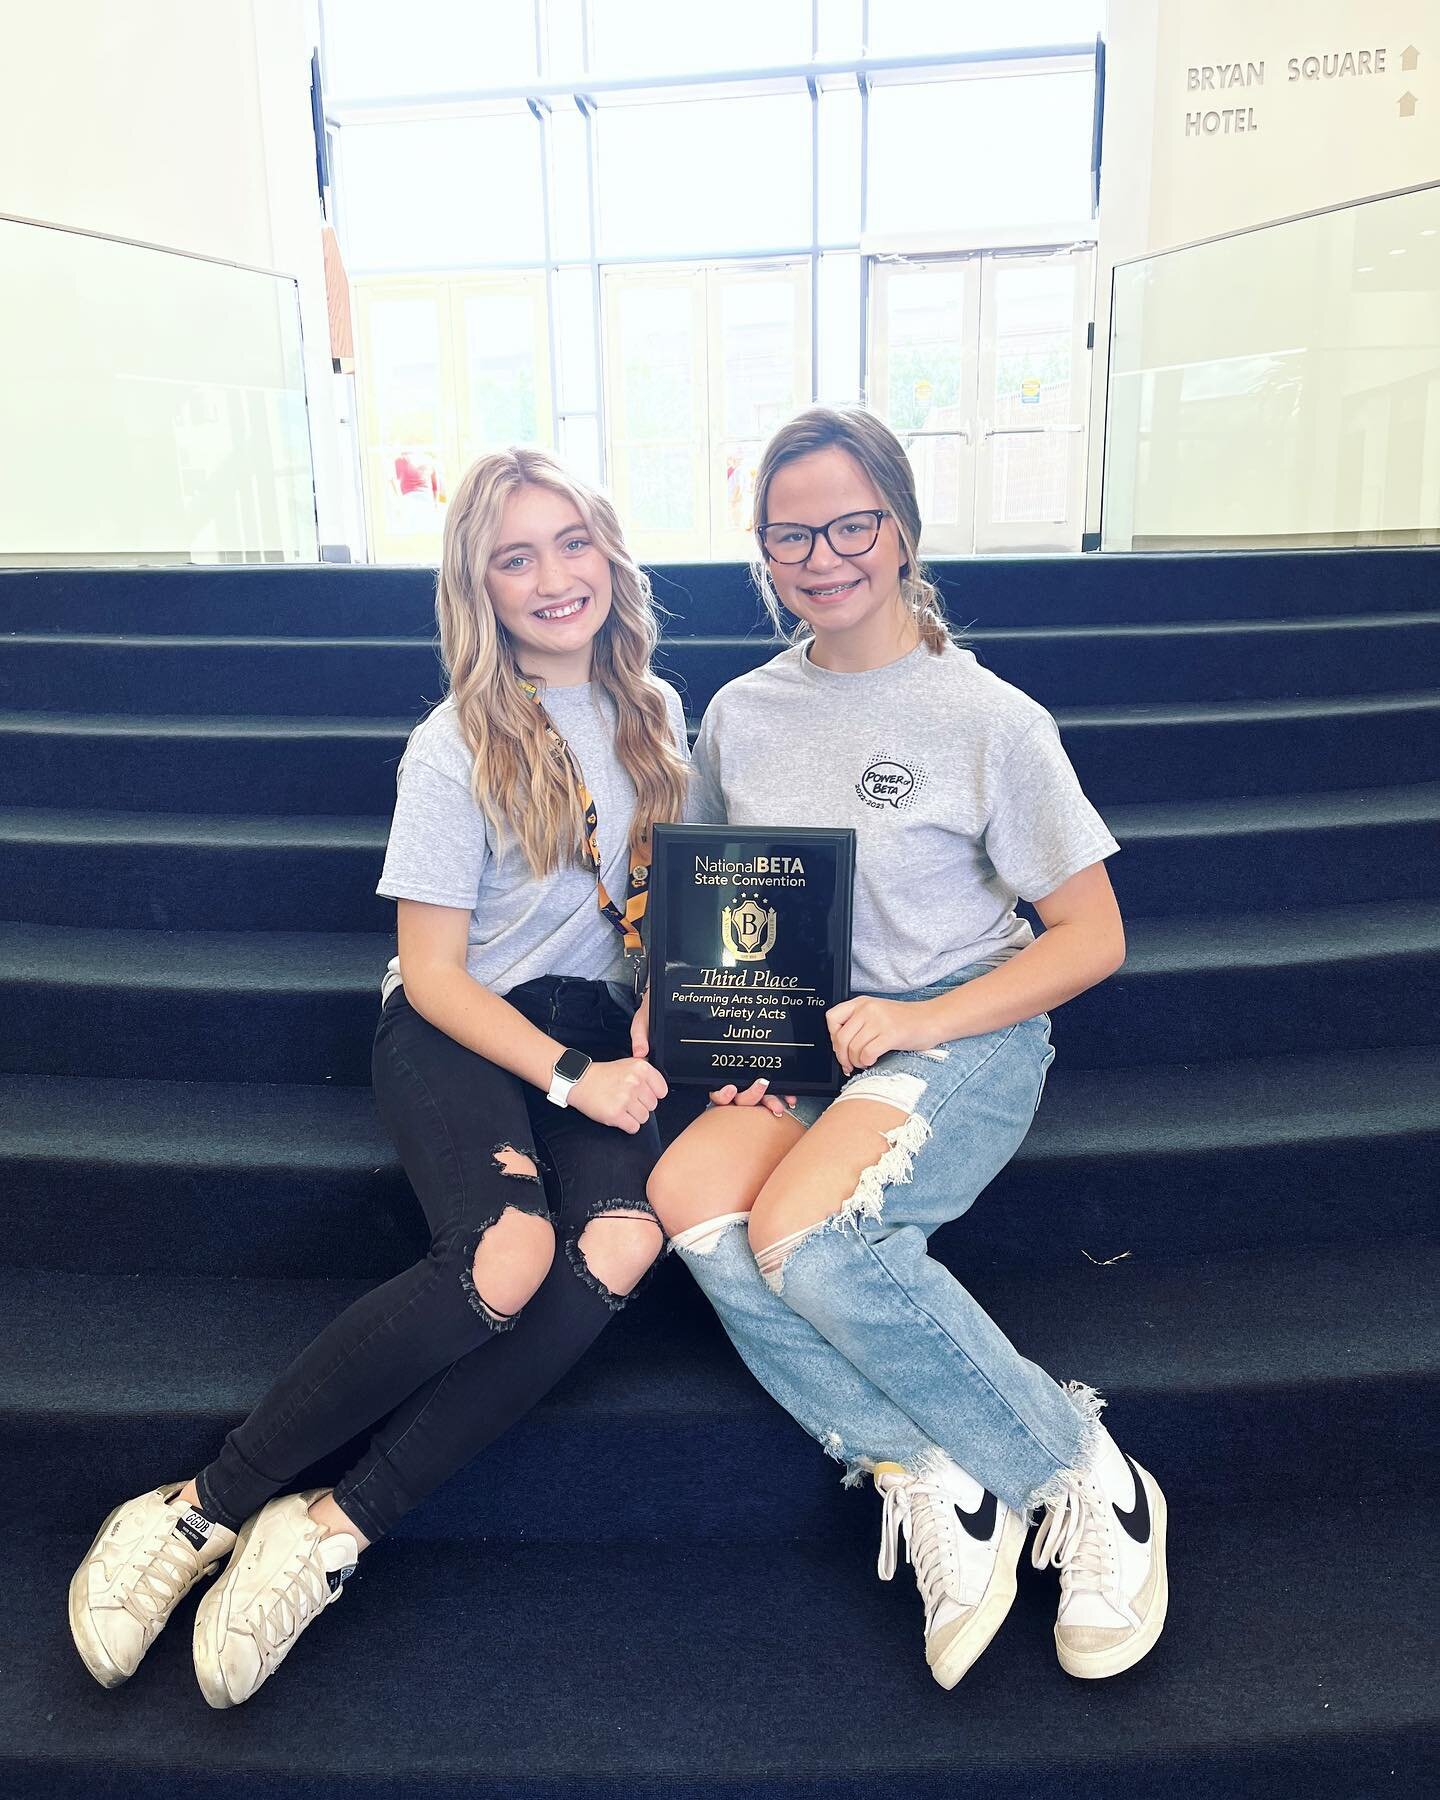 Congratulations to these two superstars for placing third in the state at the state BETA club convention. The GEMS are so proud of Adalyn and Ellington💎
#betaclub #stateconvention #GEMNATION